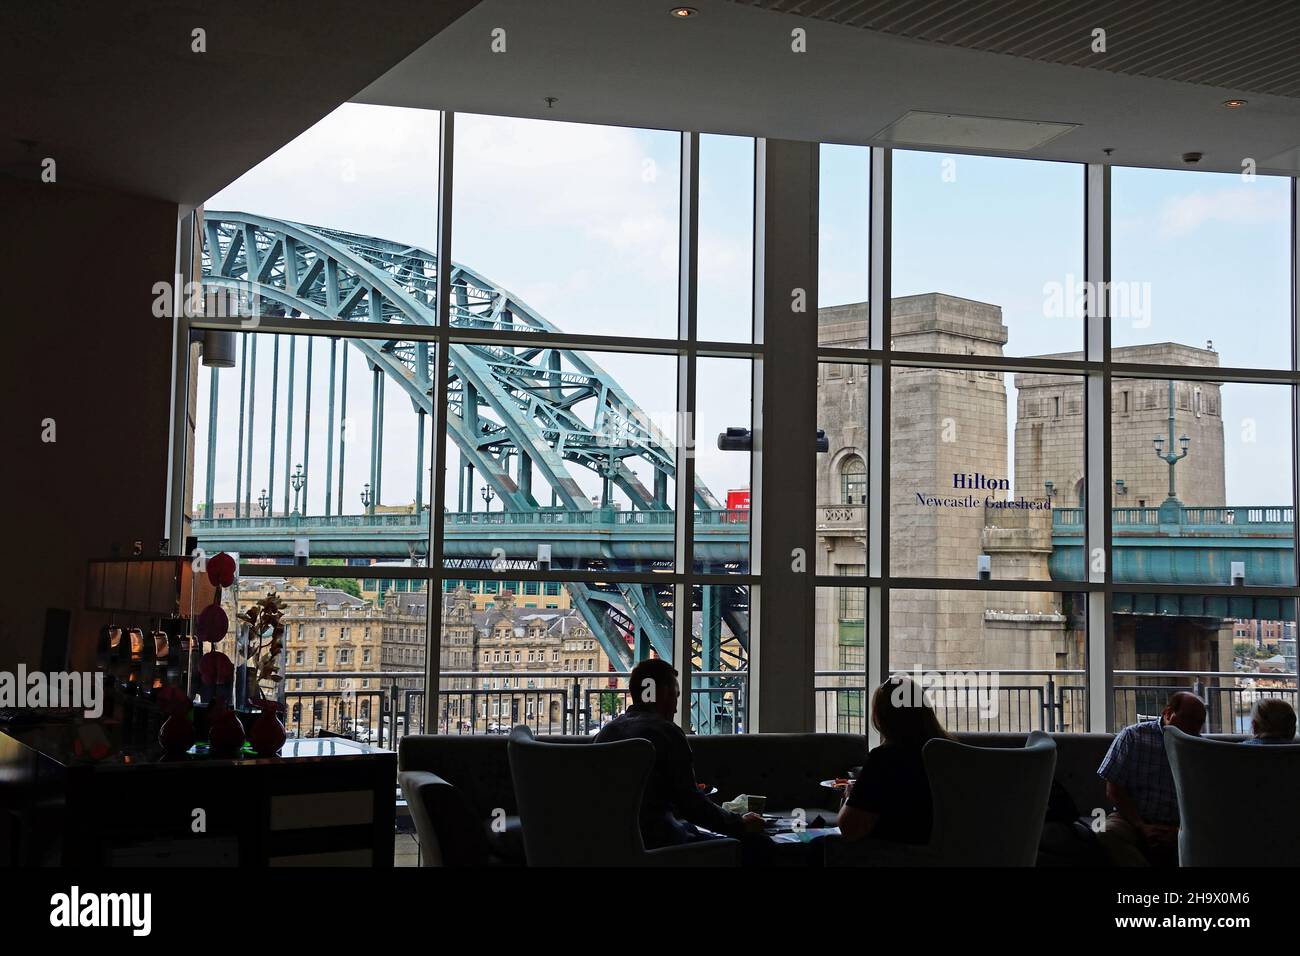 People sitting in the bar of the Hilton Hotel in Gateshead with view of the Tyne Bridge across the River Tyne, Newcastle upon Tyne, Tyne and Wear, UK Stock Photo